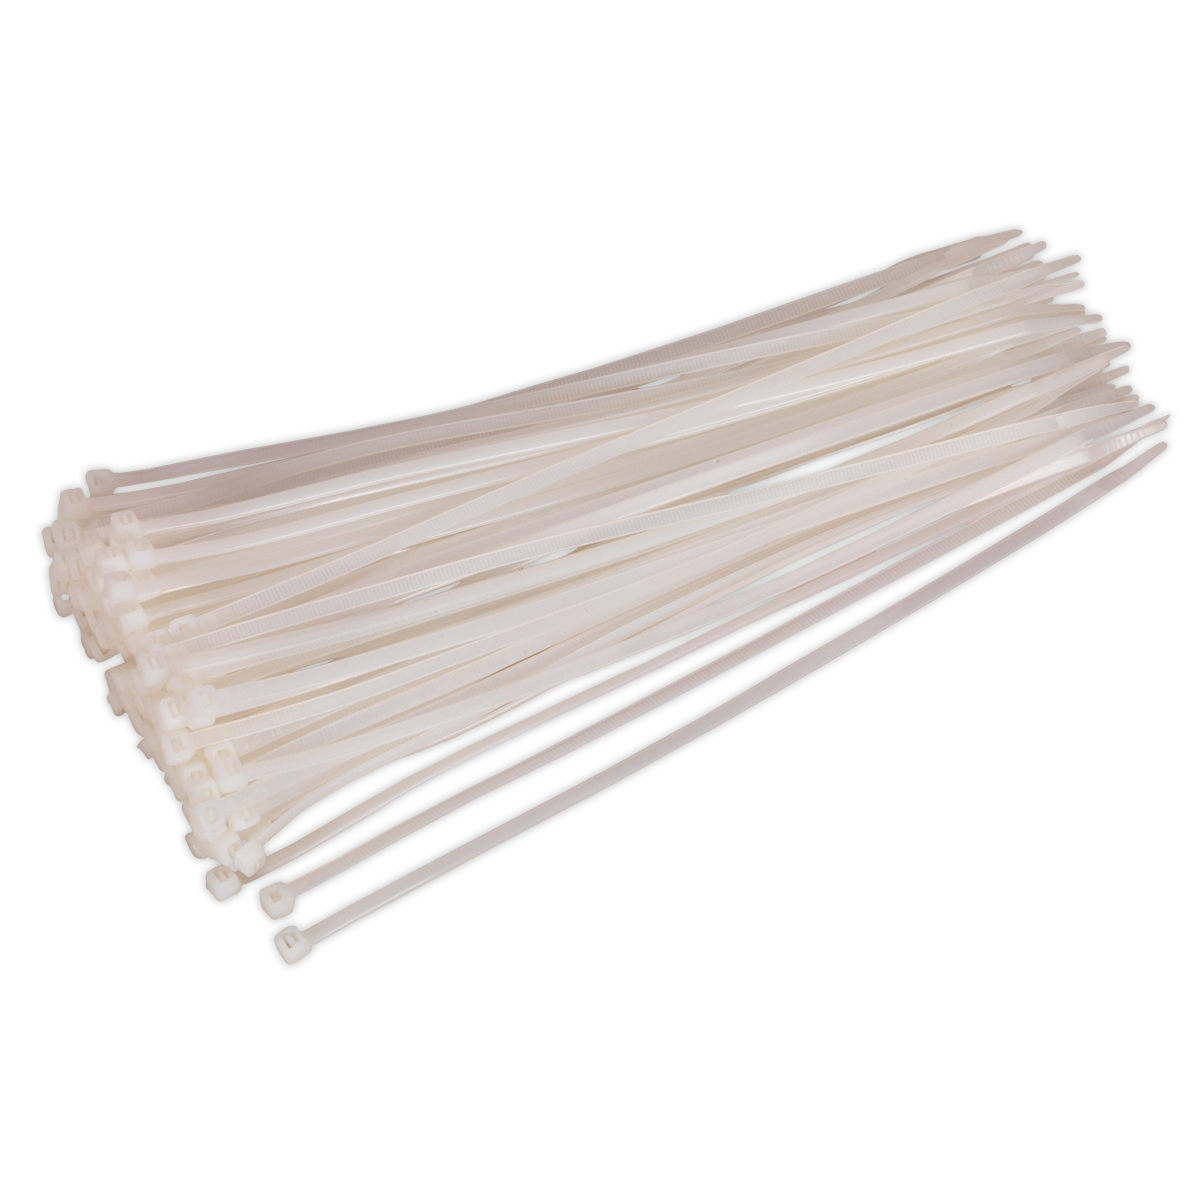 Cable Tie 300 x 4.8mm White Pack of 100 - CT30048P100W - Farming Parts